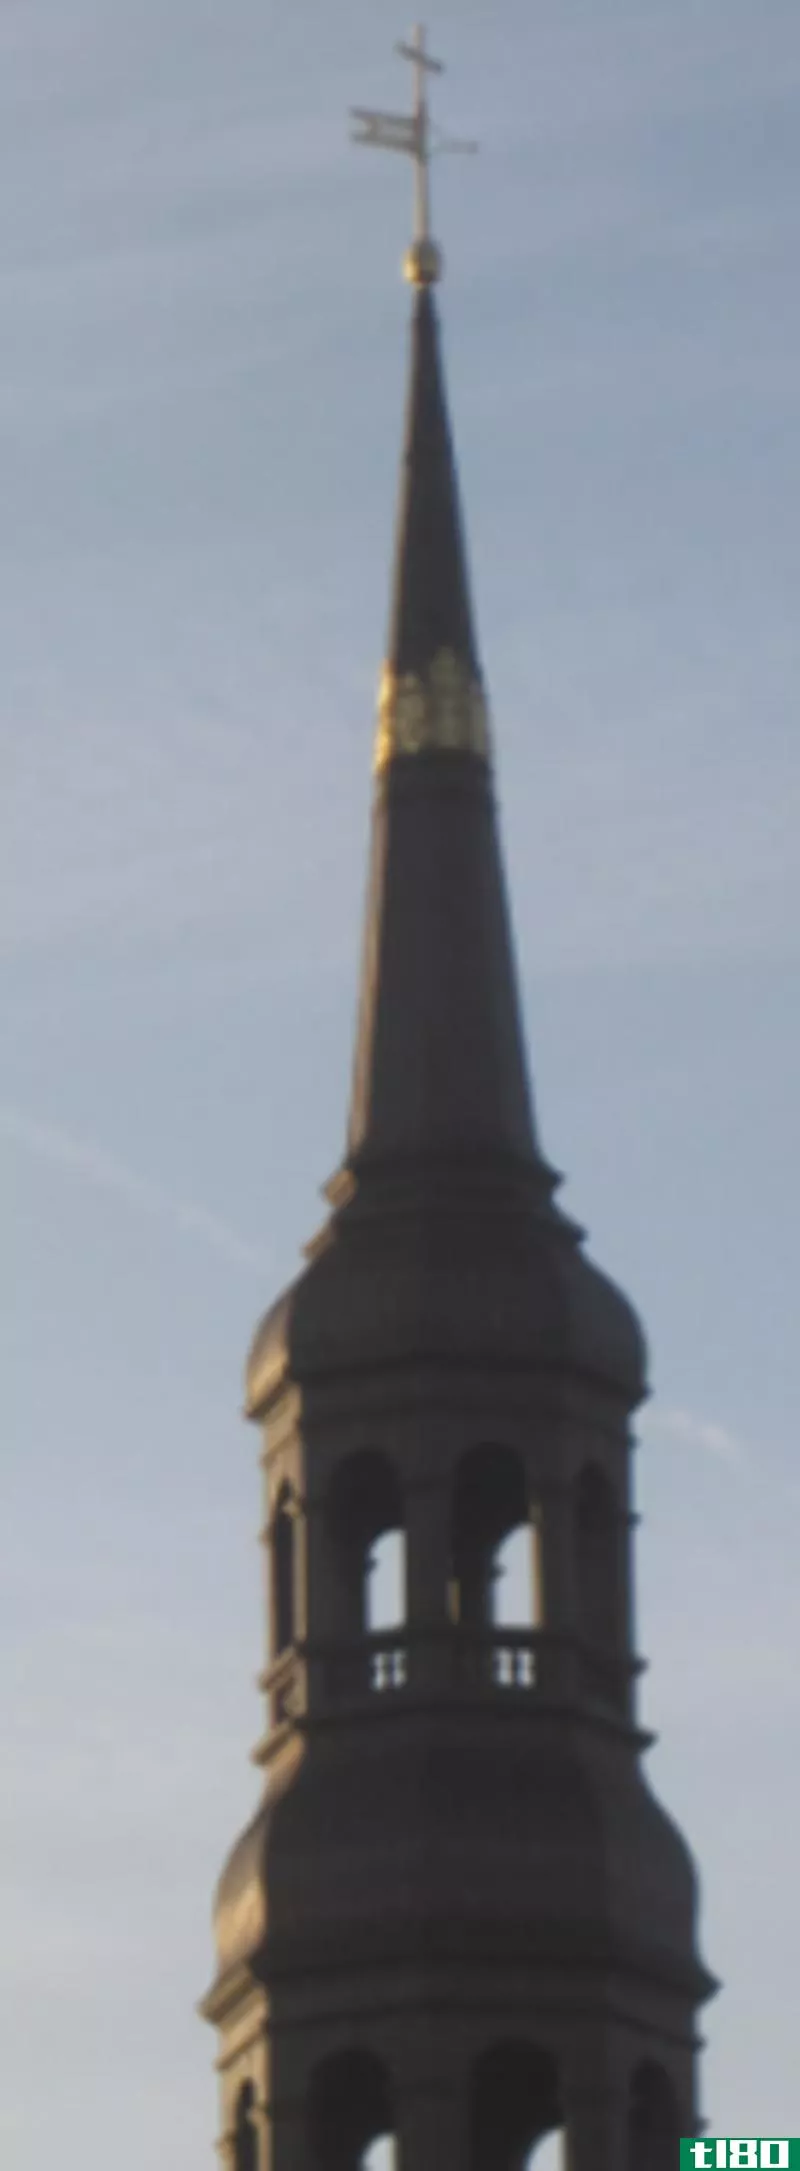 Illustration for article titled Challenge: Which Steeple Is the Oldest?